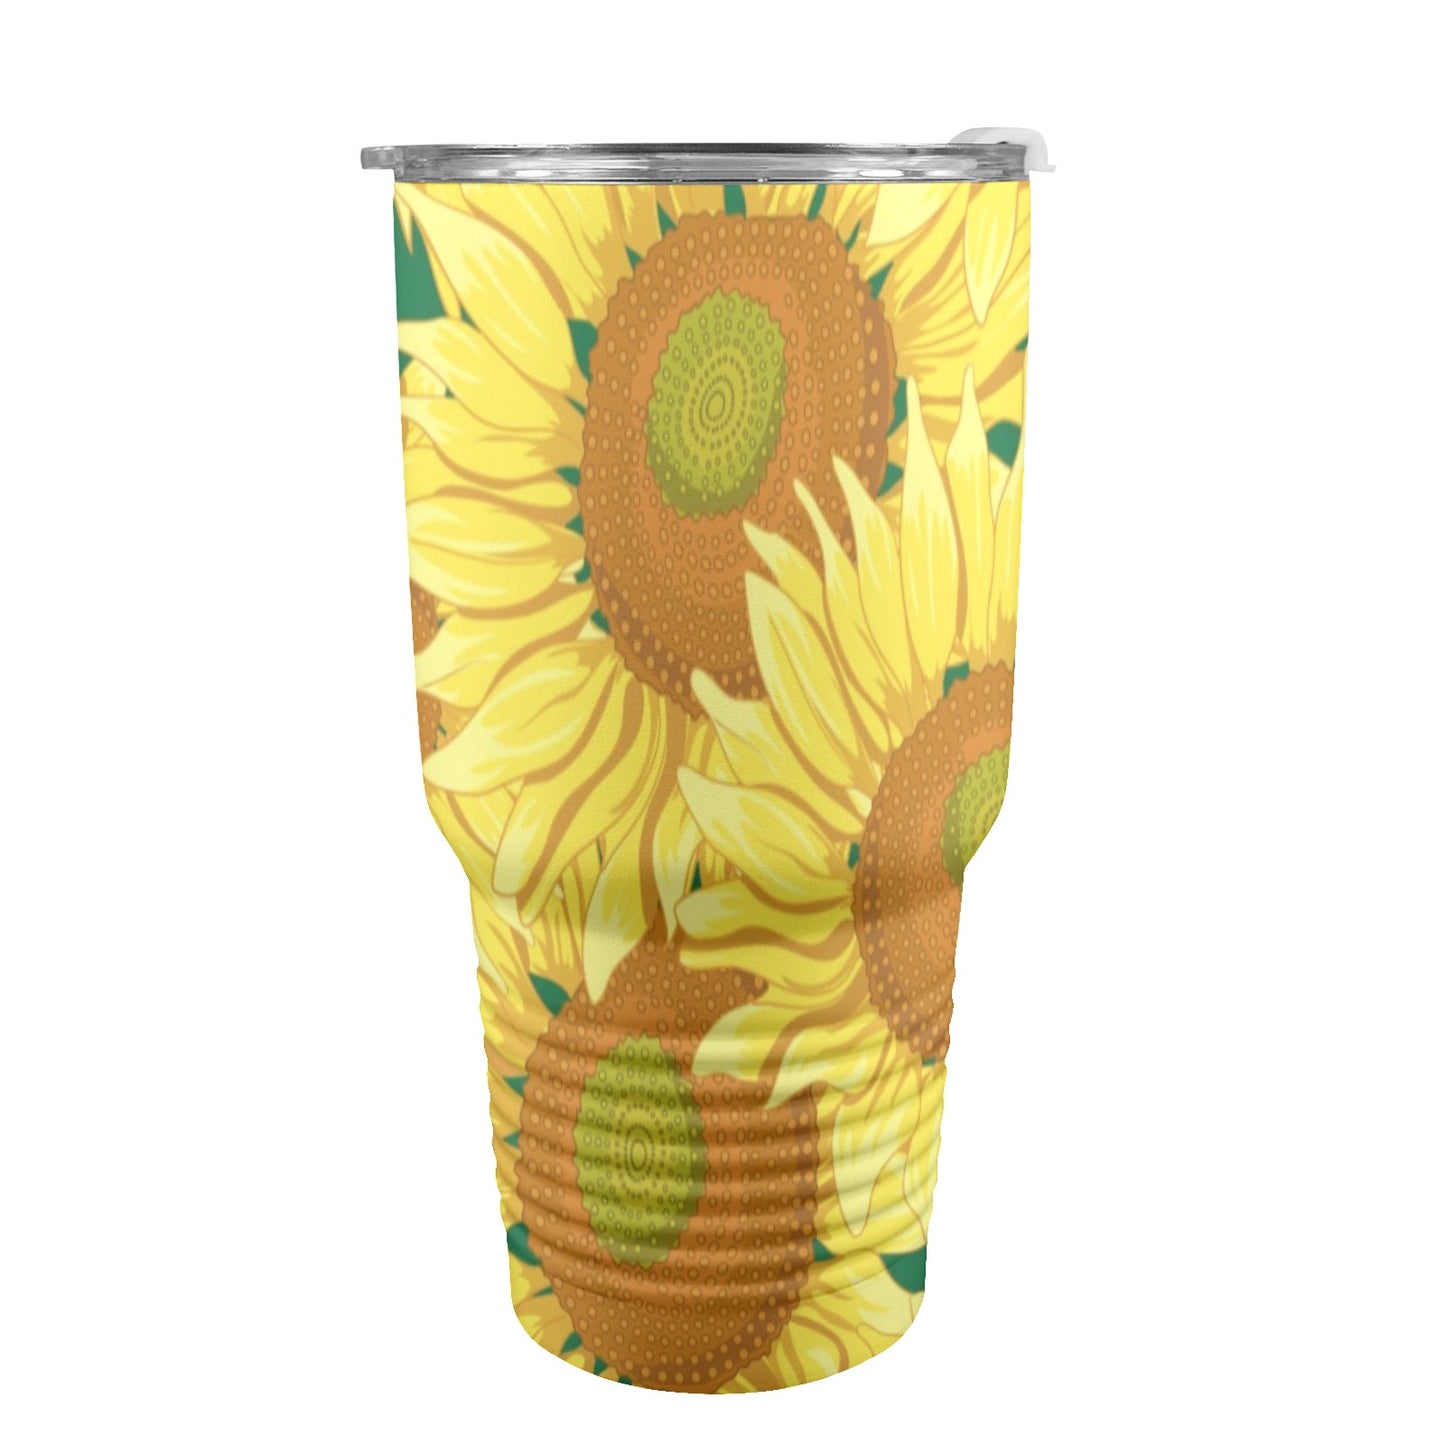 Sunflowers - 30oz Insulated Stainless Steel Mobile Tumbler 30oz Insulated Stainless Steel Mobile Tumbler Plants